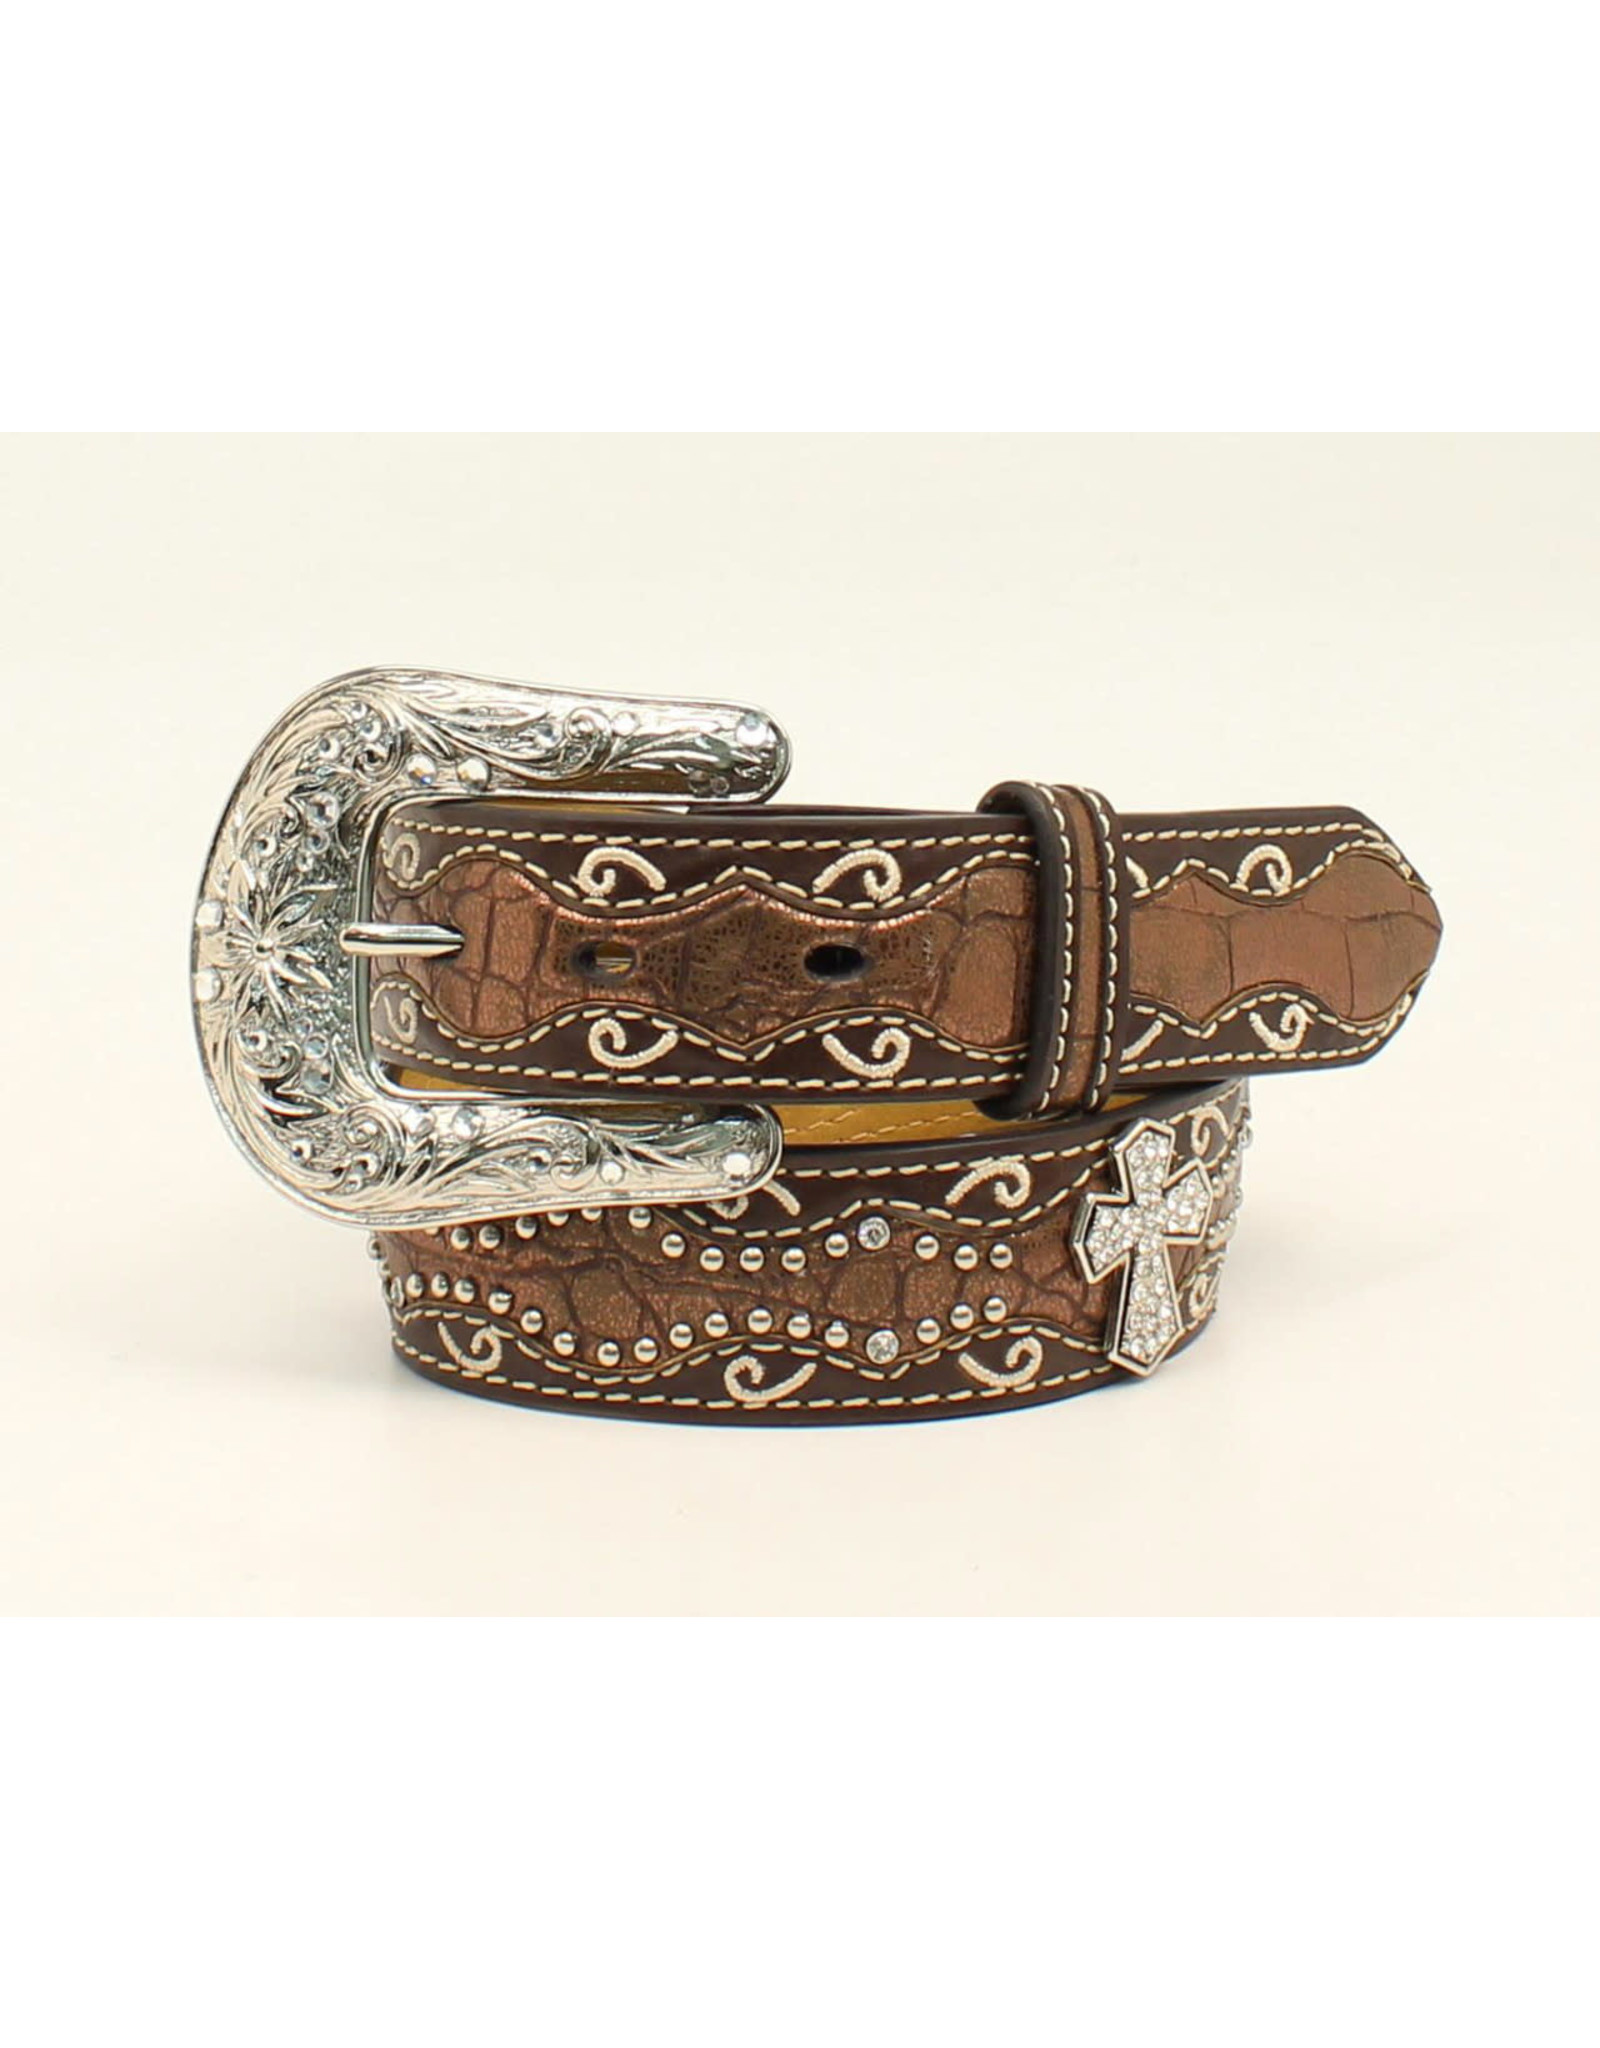 Ariat Ariat Kids Gator Inlay With Cross Conchos Belt A1302802